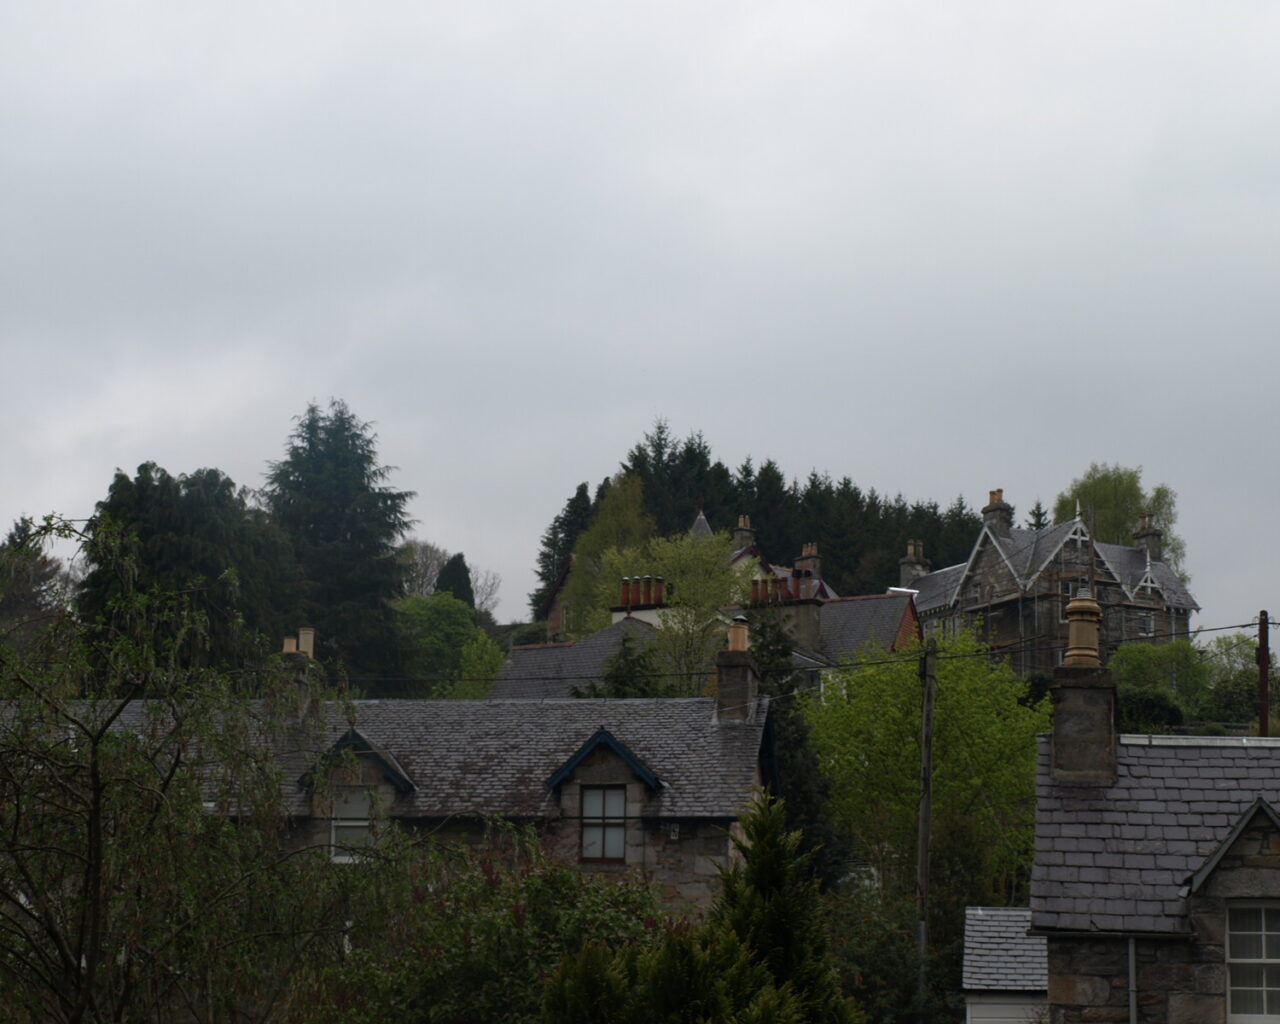 04 - Pitlochry